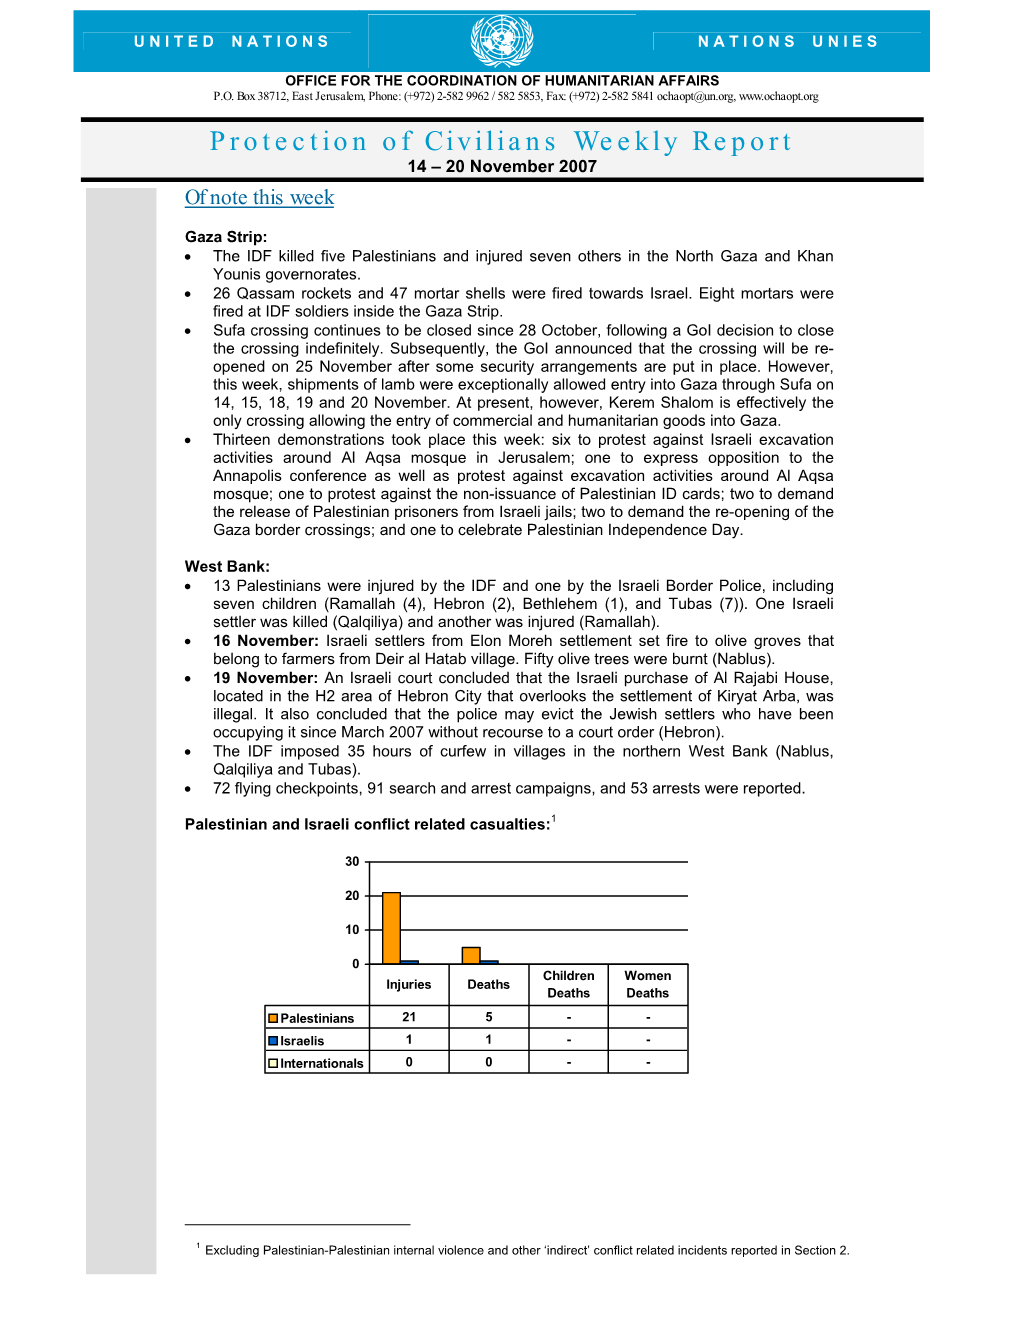 Protection of Civilians Weekly Report 14 – 20 November 2007 of Note This Week